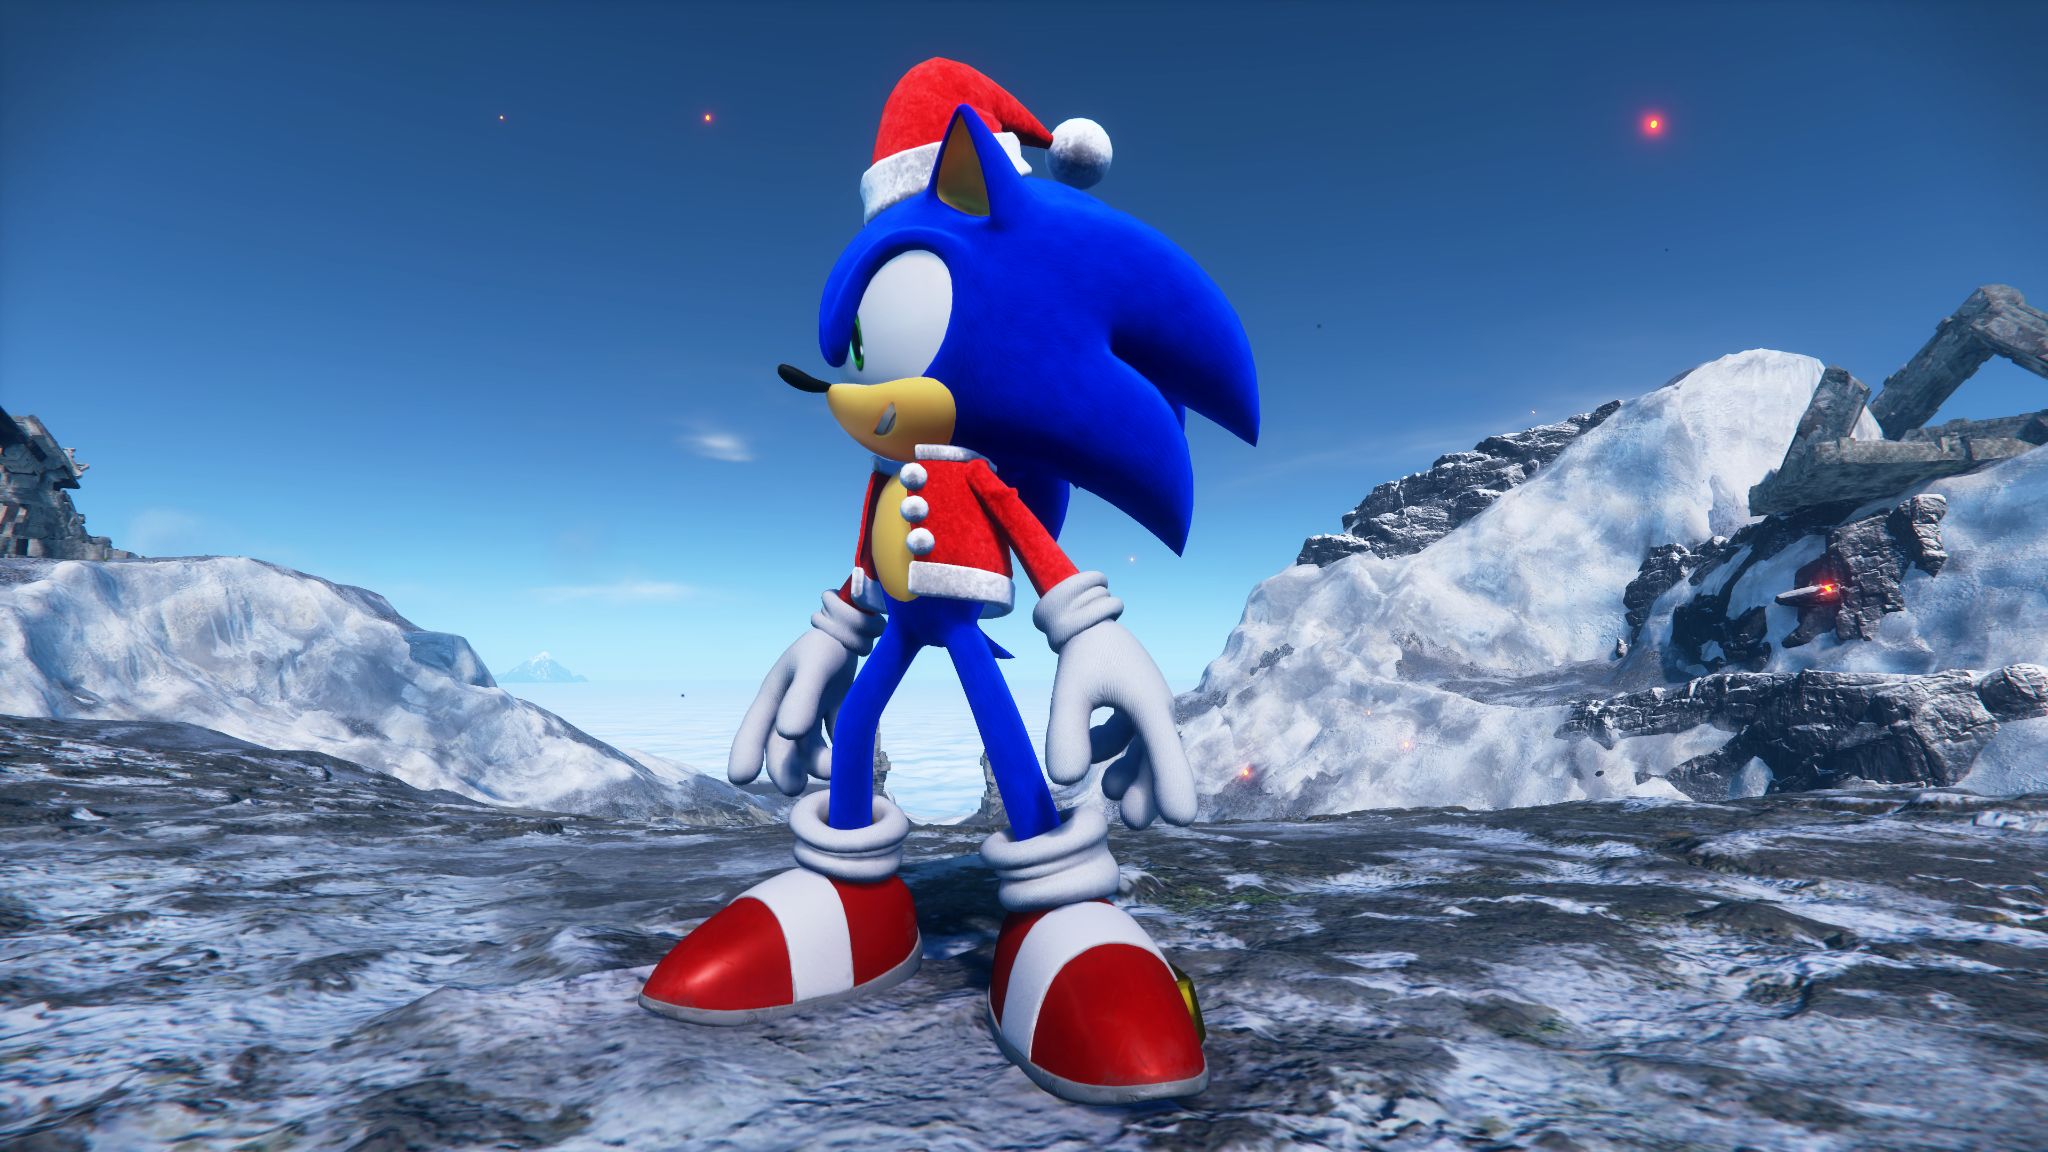 Here's seven more minutes of Sonic Frontiers' open-world gameplay